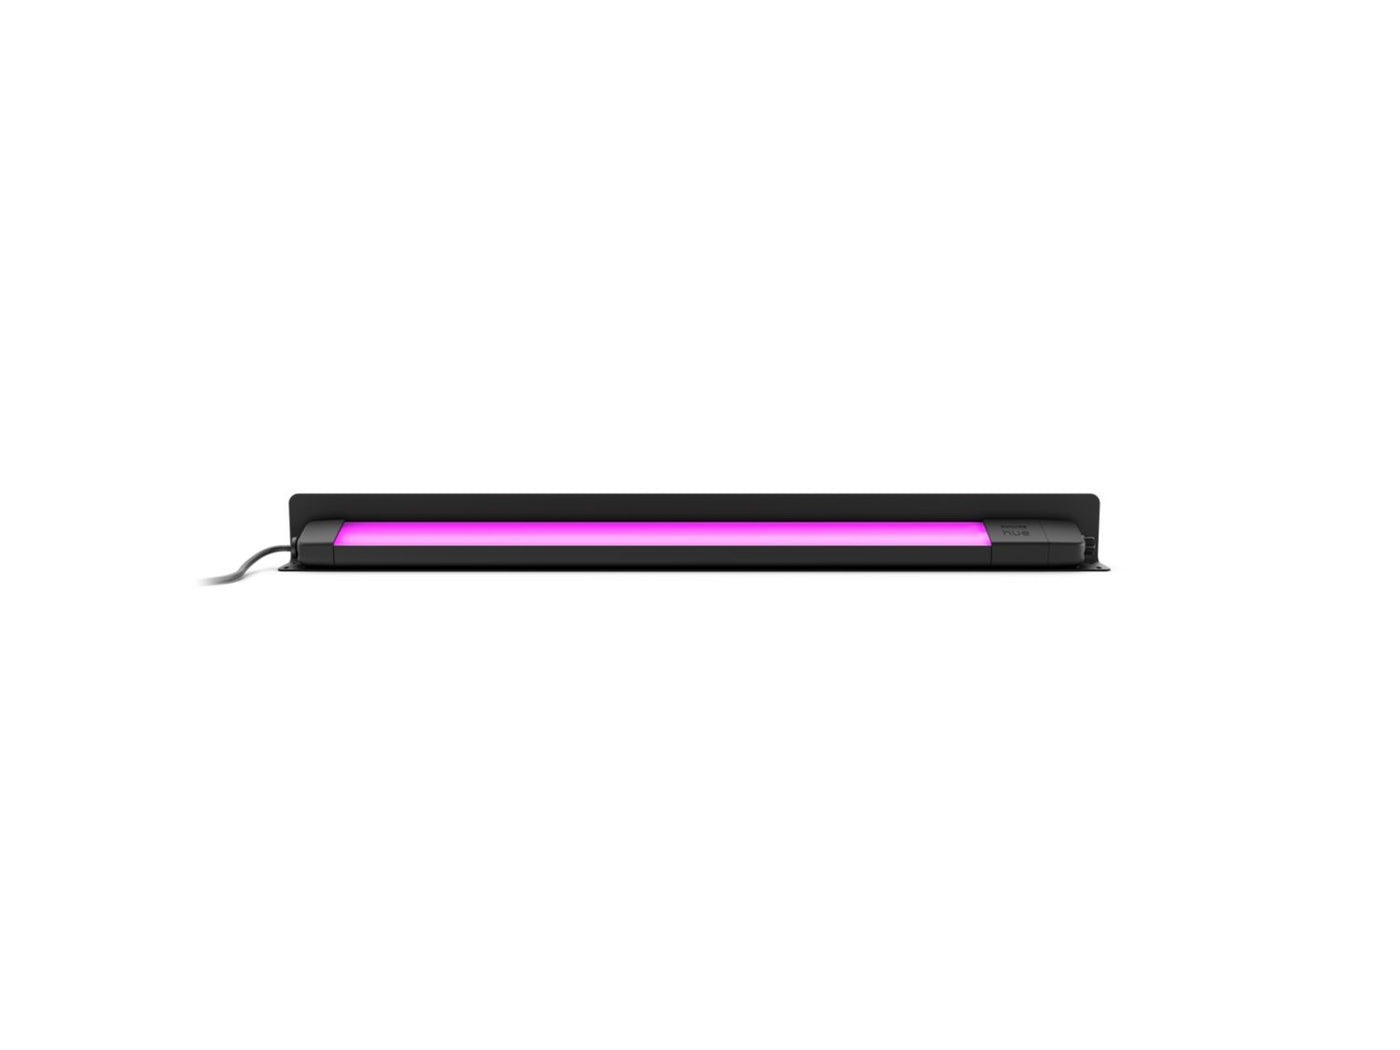 Amarant Linear Outdoor Lamp W&Color Ambiance